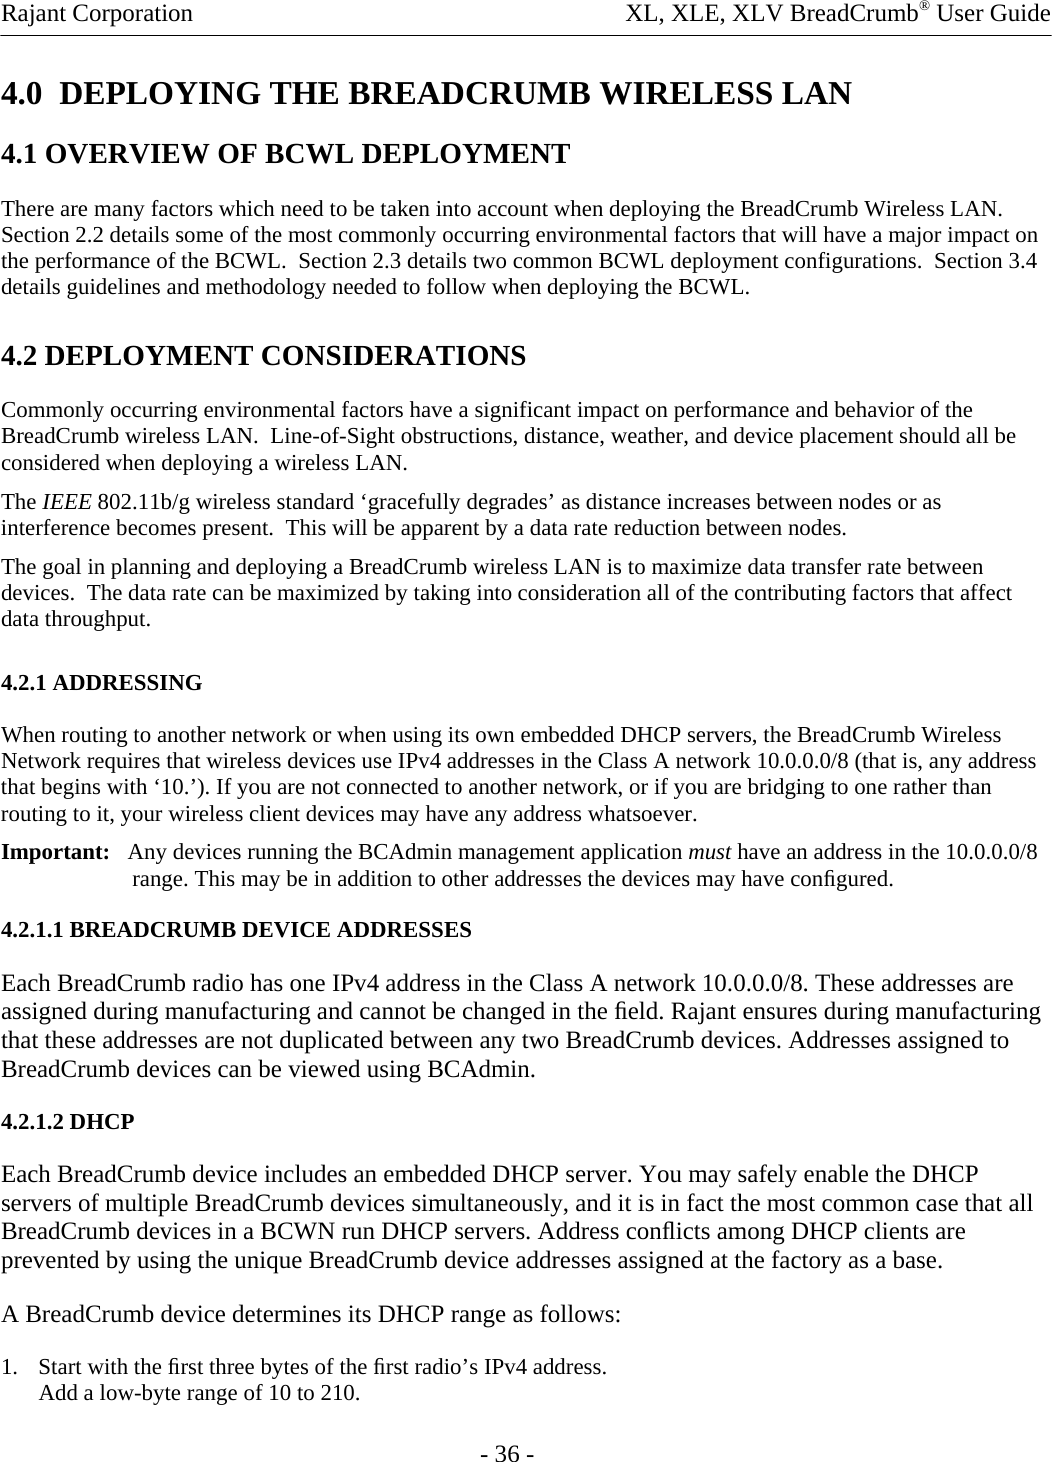 Rajant Corporation    XL, XLE, XLV BreadCrumb® User Guide - 36 - 4.0  DEPLOYING THE BREADCRUMB WIRELESS LAN 4.1 OVERVIEW OF BCWL DEPLOYMENT There are many factors which need to be taken into account when deploying the BreadCrumb Wireless LAN.  Section 2.2 details some of the most commonly occurring environmental factors that will have a major impact on the performance of the BCWL.  Section 2.3 details two common BCWL deployment configurations.  Section 3.4 details guidelines and methodology needed to follow when deploying the BCWL. 4.2 DEPLOYMENT CONSIDERATIONS Commonly occurring environmental factors have a significant impact on performance and behavior of the BreadCrumb wireless LAN.  Line-of-Sight obstructions, distance, weather, and device placement should all be considered when deploying a wireless LAN. The IEEE 802.11b/g wireless standard ‘gracefully degrades’ as distance increases between nodes or as interference becomes present.  This will be apparent by a data rate reduction between nodes. The goal in planning and deploying a BreadCrumb wireless LAN is to maximize data transfer rate between devices.  The data rate can be maximized by taking into consideration all of the contributing factors that affect data throughput.   4.2.1 ADDRESSING  When routing to another network or when using its own embedded DHCP servers, the BreadCrumb Wireless Network requires that wireless devices use IPv4 addresses in the Class A network 10.0.0.0/8 (that is, any address that begins with ‘10.’). If you are not connected to another network, or if you are bridging to one rather than routing to it, your wireless client devices may have any address whatsoever.  Important:   Any devices running the BCAdmin management application must have an address in the 10.0.0.0/8 range. This may be in addition to other addresses the devices may have conﬁgured.  4.2.1.1 BREADCRUMB DEVICE ADDRESSES  Each BreadCrumb radio has one IPv4 address in the Class A network 10.0.0.0/8. These addresses are assigned during manufacturing and cannot be changed in the ﬁeld. Rajant ensures during manufacturing that these addresses are not duplicated between any two BreadCrumb devices. Addresses assigned to BreadCrumb devices can be viewed using BCAdmin.  4.2.1.2 DHCP  Each BreadCrumb device includes an embedded DHCP server. You may safely enable the DHCP servers of multiple BreadCrumb devices simultaneously, and it is in fact the most common case that all BreadCrumb devices in a BCWN run DHCP servers. Address conﬂicts among DHCP clients are prevented by using the unique BreadCrumb device addresses assigned at the factory as a base.  A BreadCrumb device determines its DHCP range as follows:  1. Start with the ﬁrst three bytes of the ﬁrst radio’s IPv4 address.  Add a low-byte range of 10 to 210.  